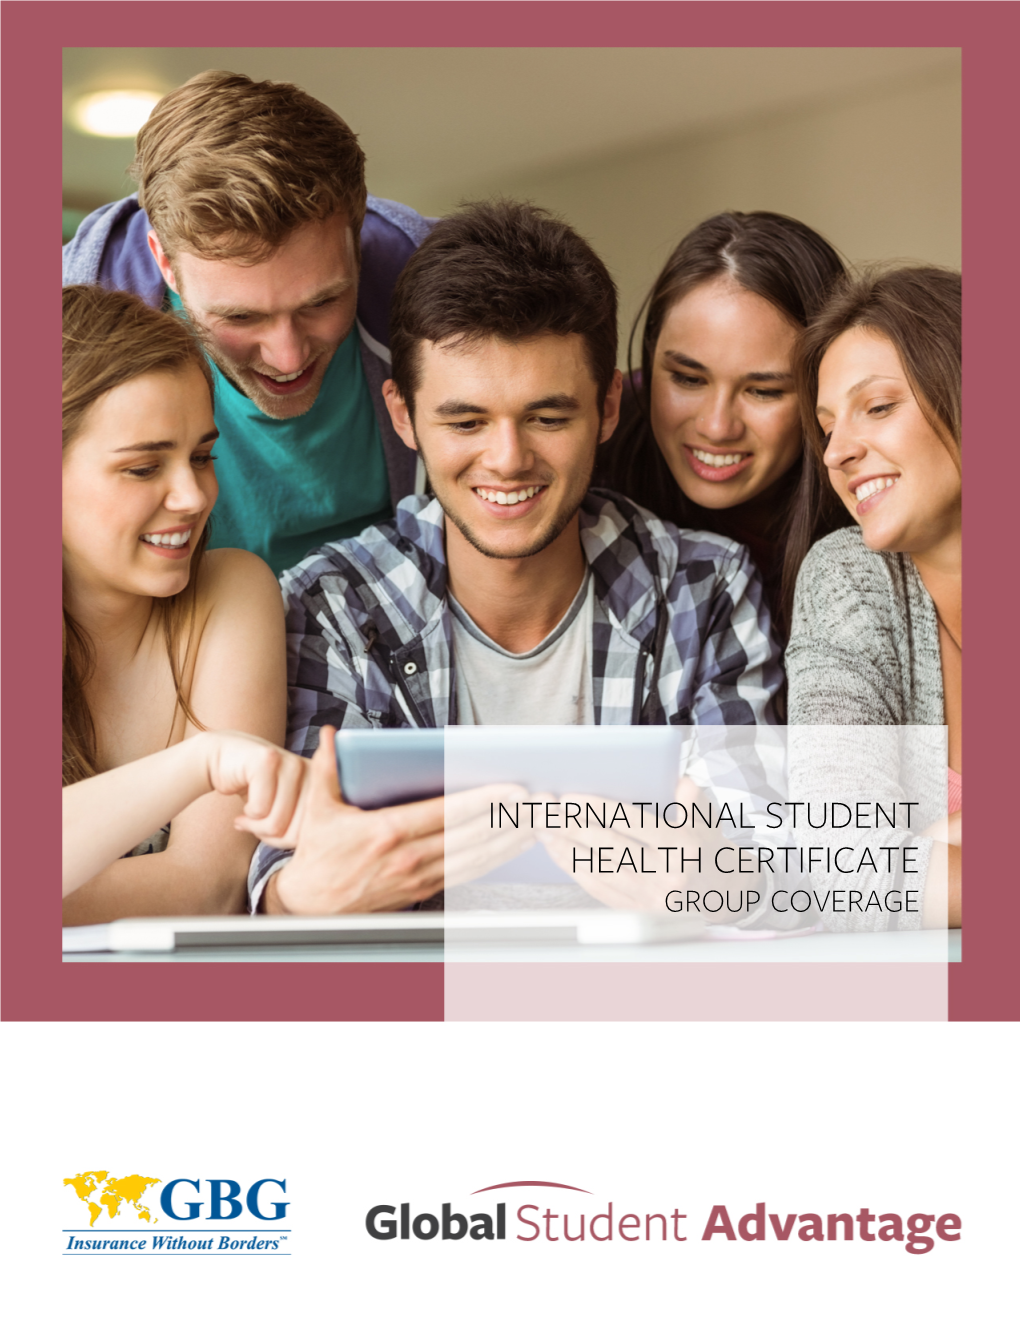 International Student Health Certificate Group Coverage